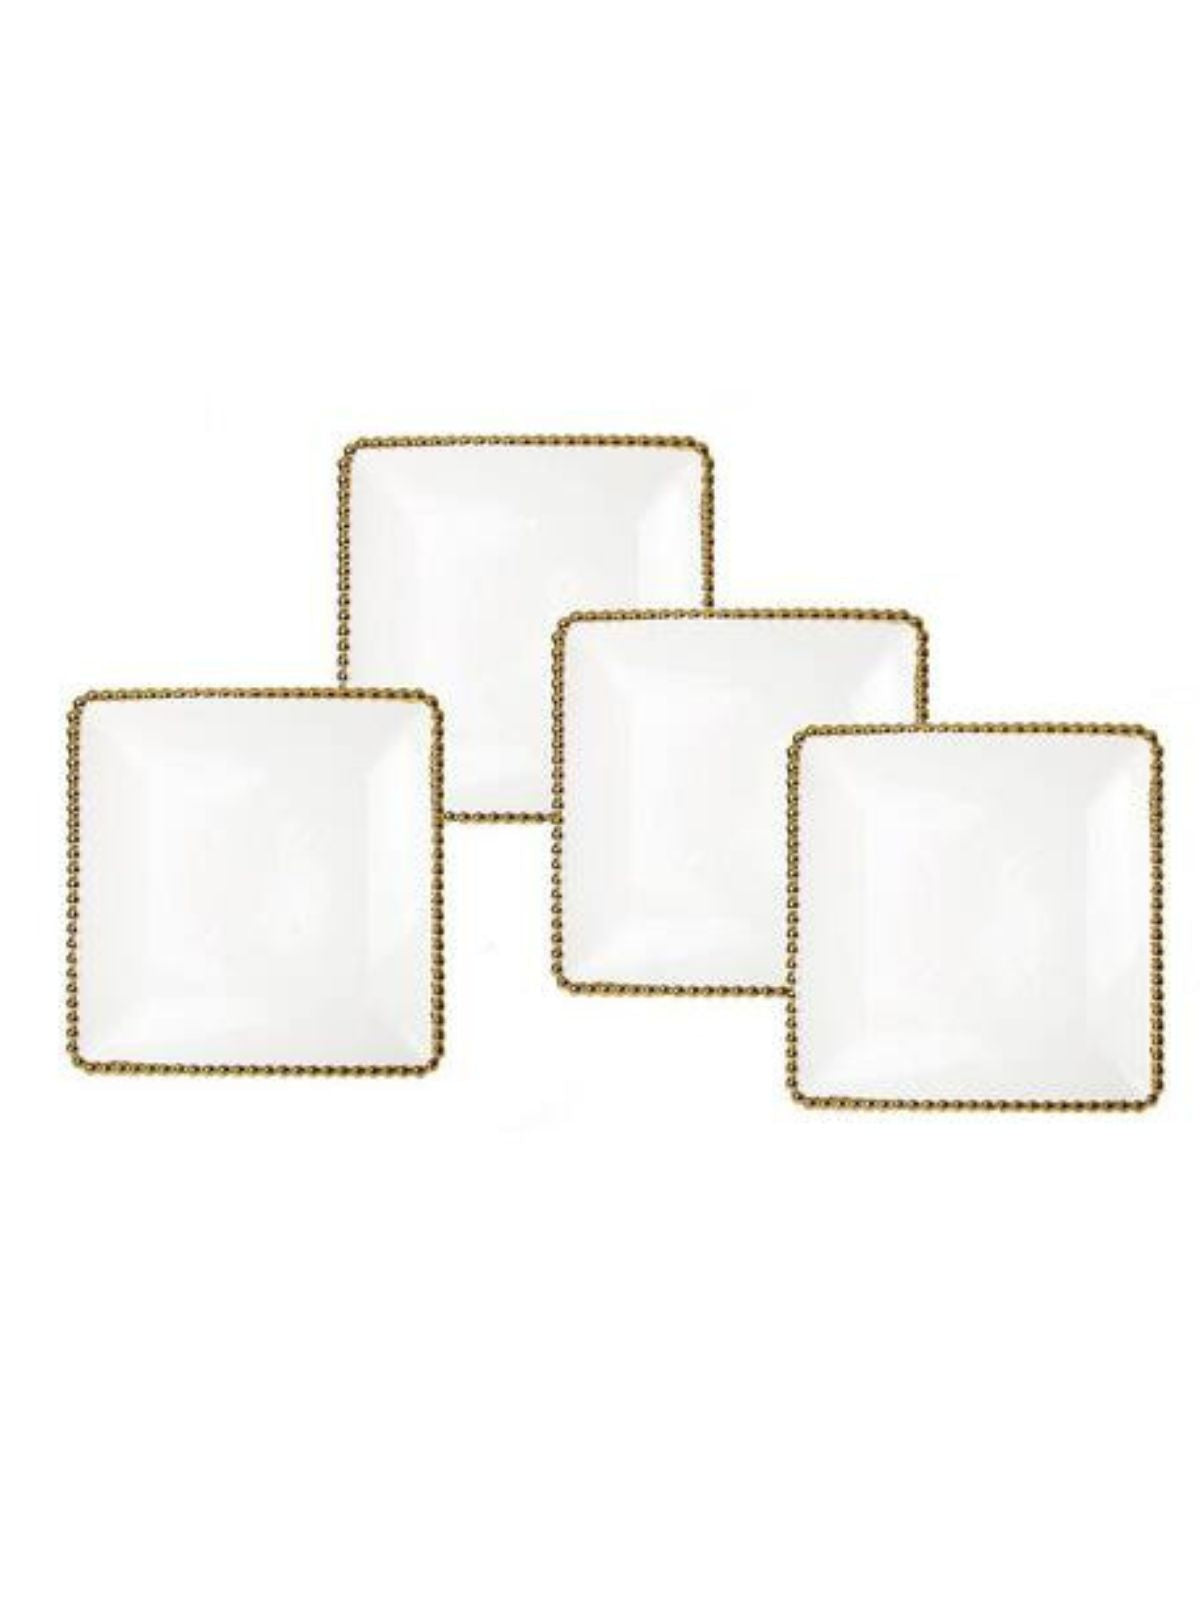 These charming 8x8 porcelain square plates come in a set of four. The gold beads edging the white plate forms the perfect balance of elegance and sophistication. Sold By KYA Home Decor. 